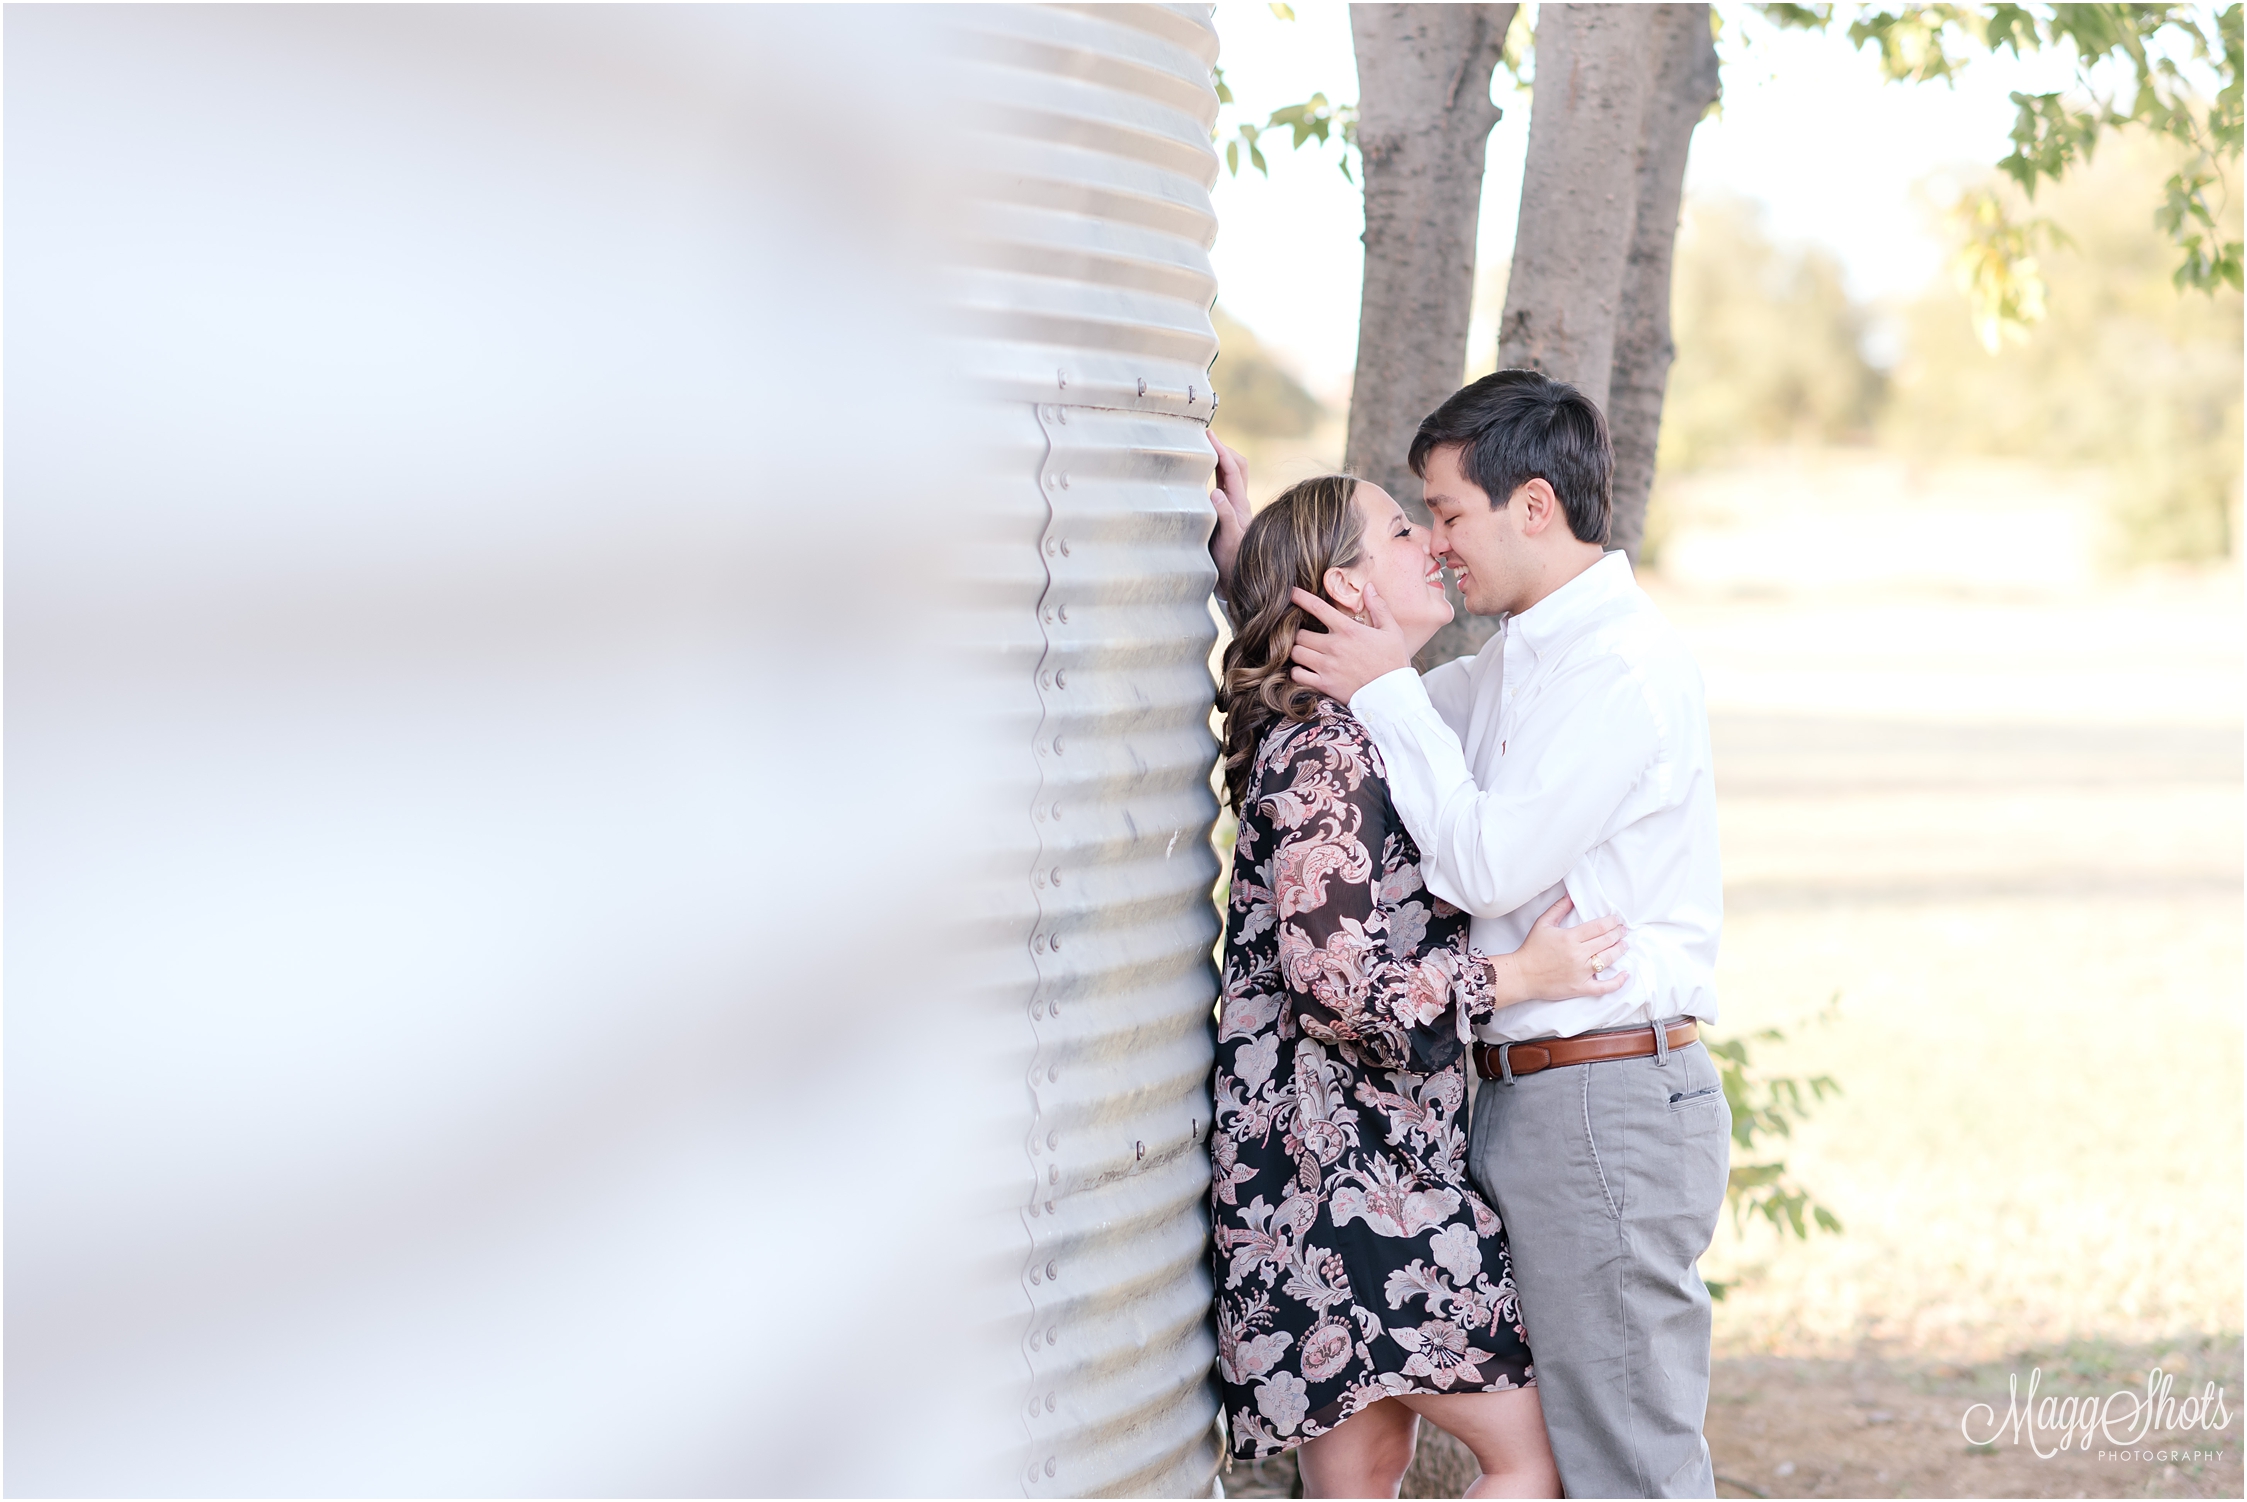 Engagements, Love, Bride and Groom, Green, Engaged, Wedding, MaggShots Photography, MaggShots, Professional Photographer, Porfessional Photography, DFW Wedding Photographer, Silos